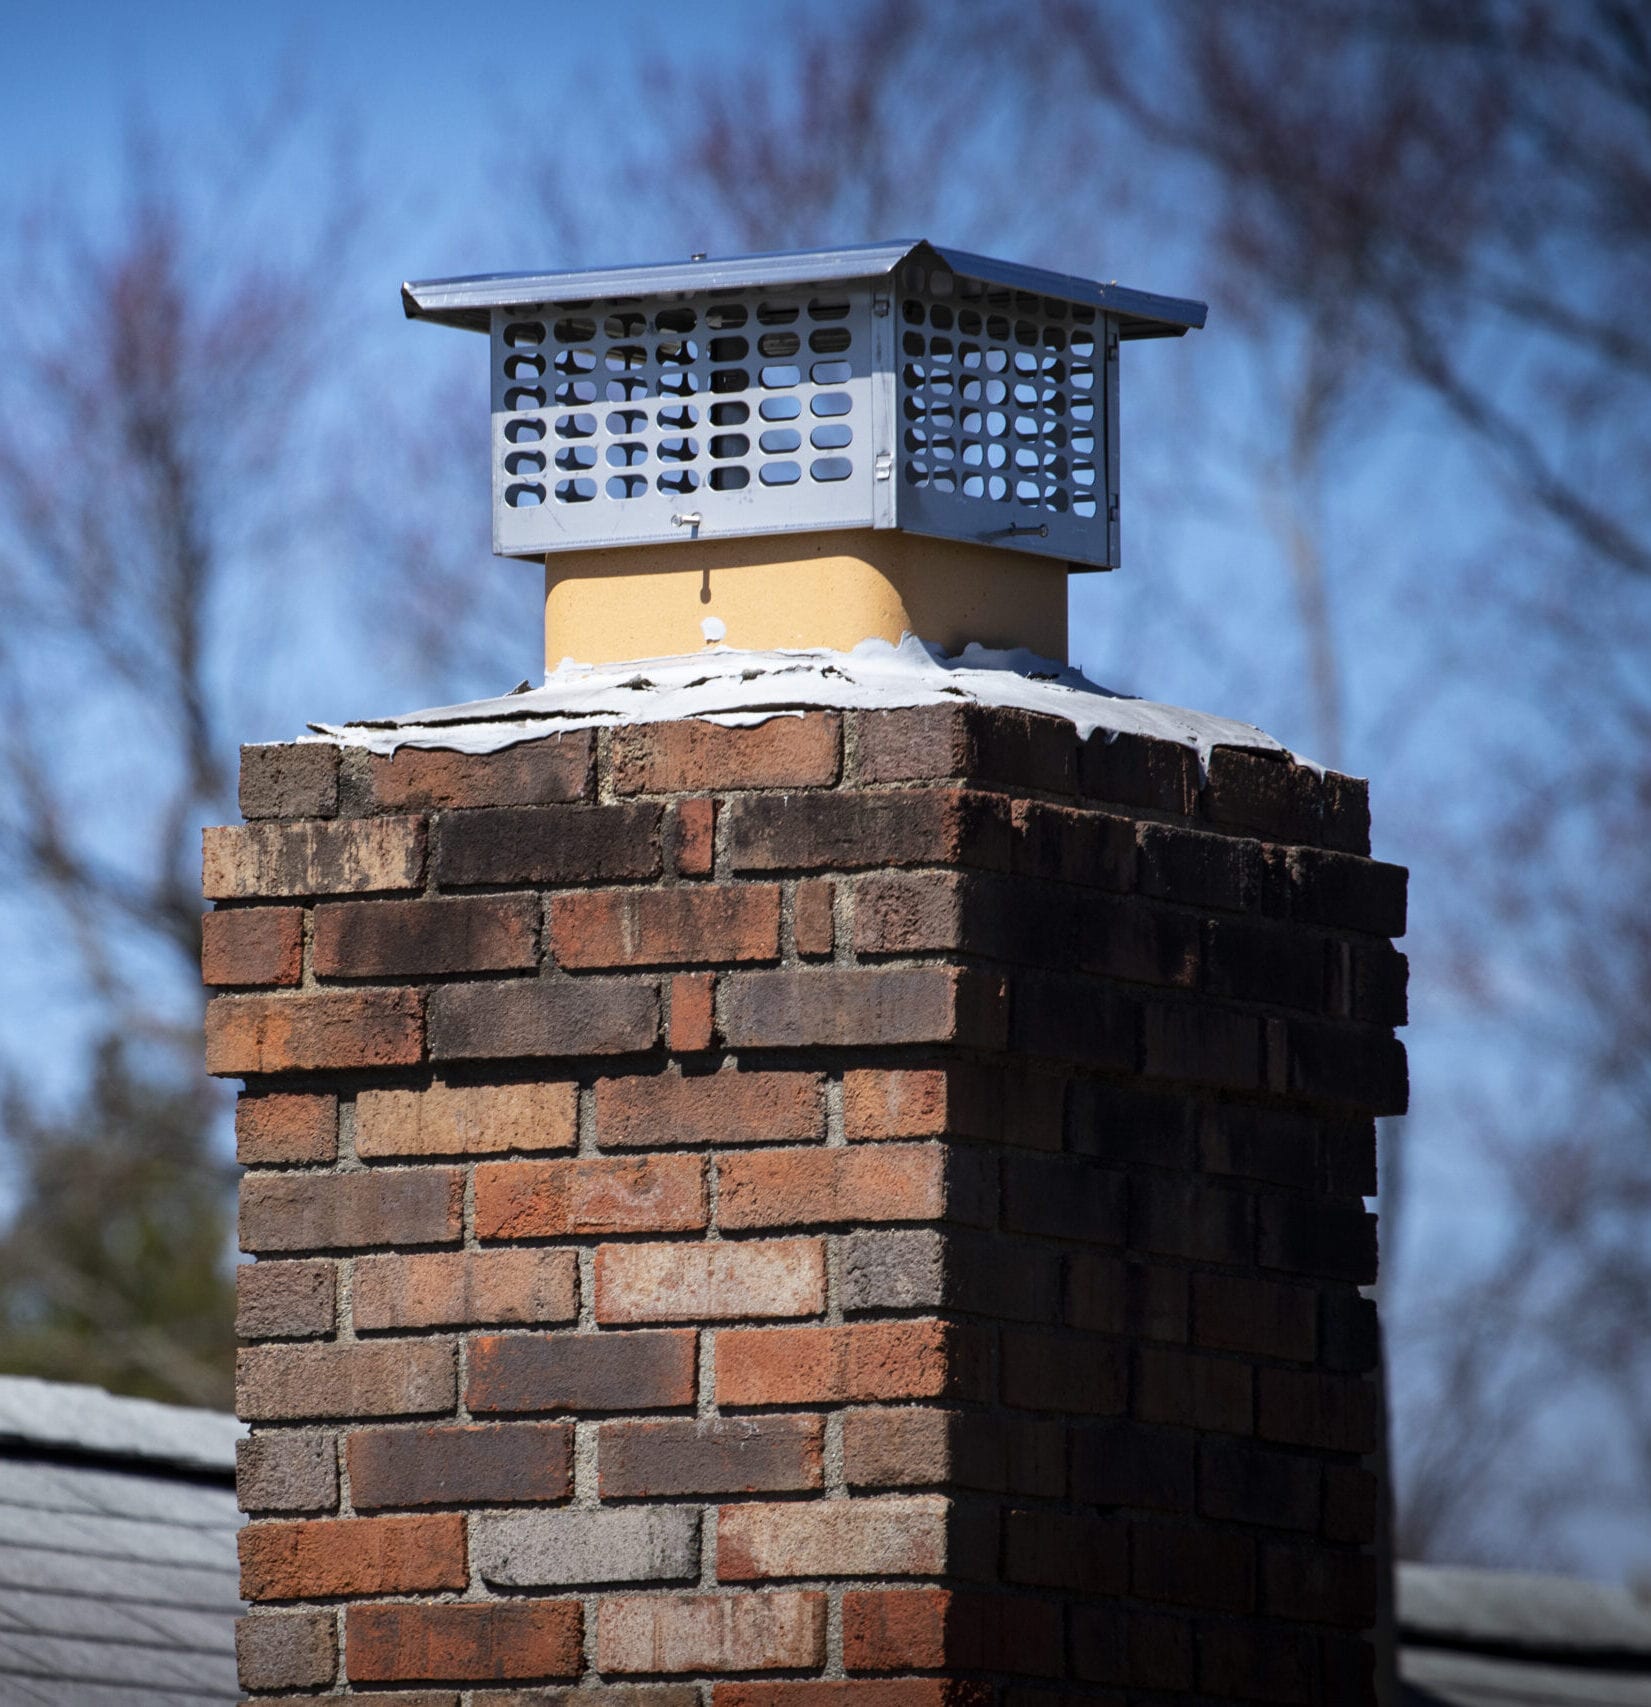 Chimney cap installed to prevent rodent entry to home/attic/building